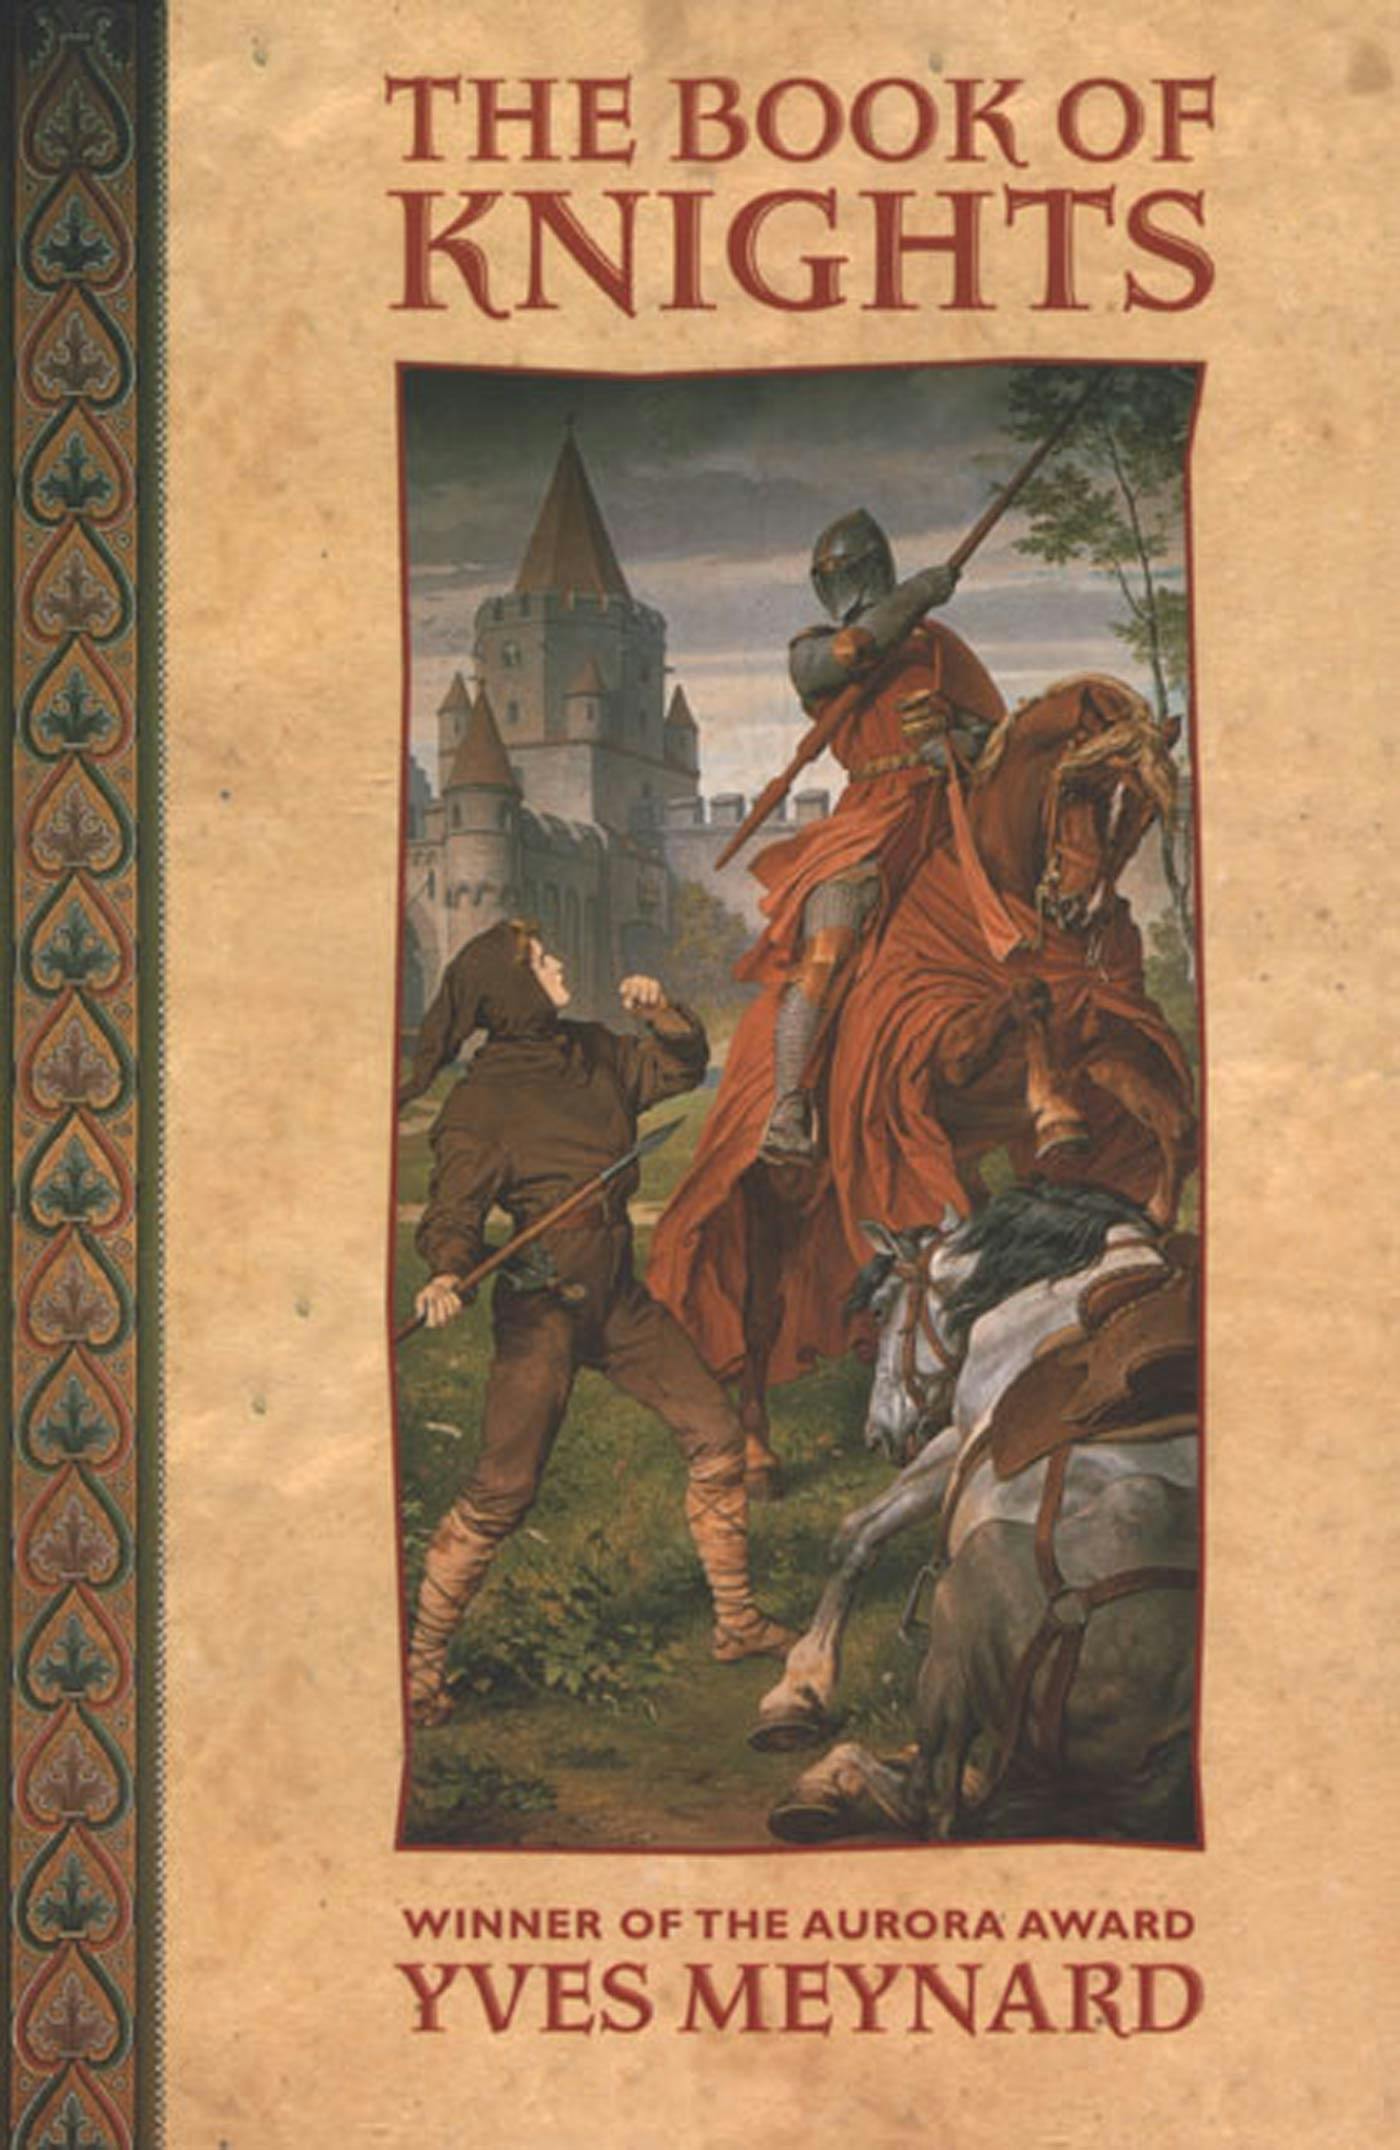 Cover for the book titled as: The Book of Knights